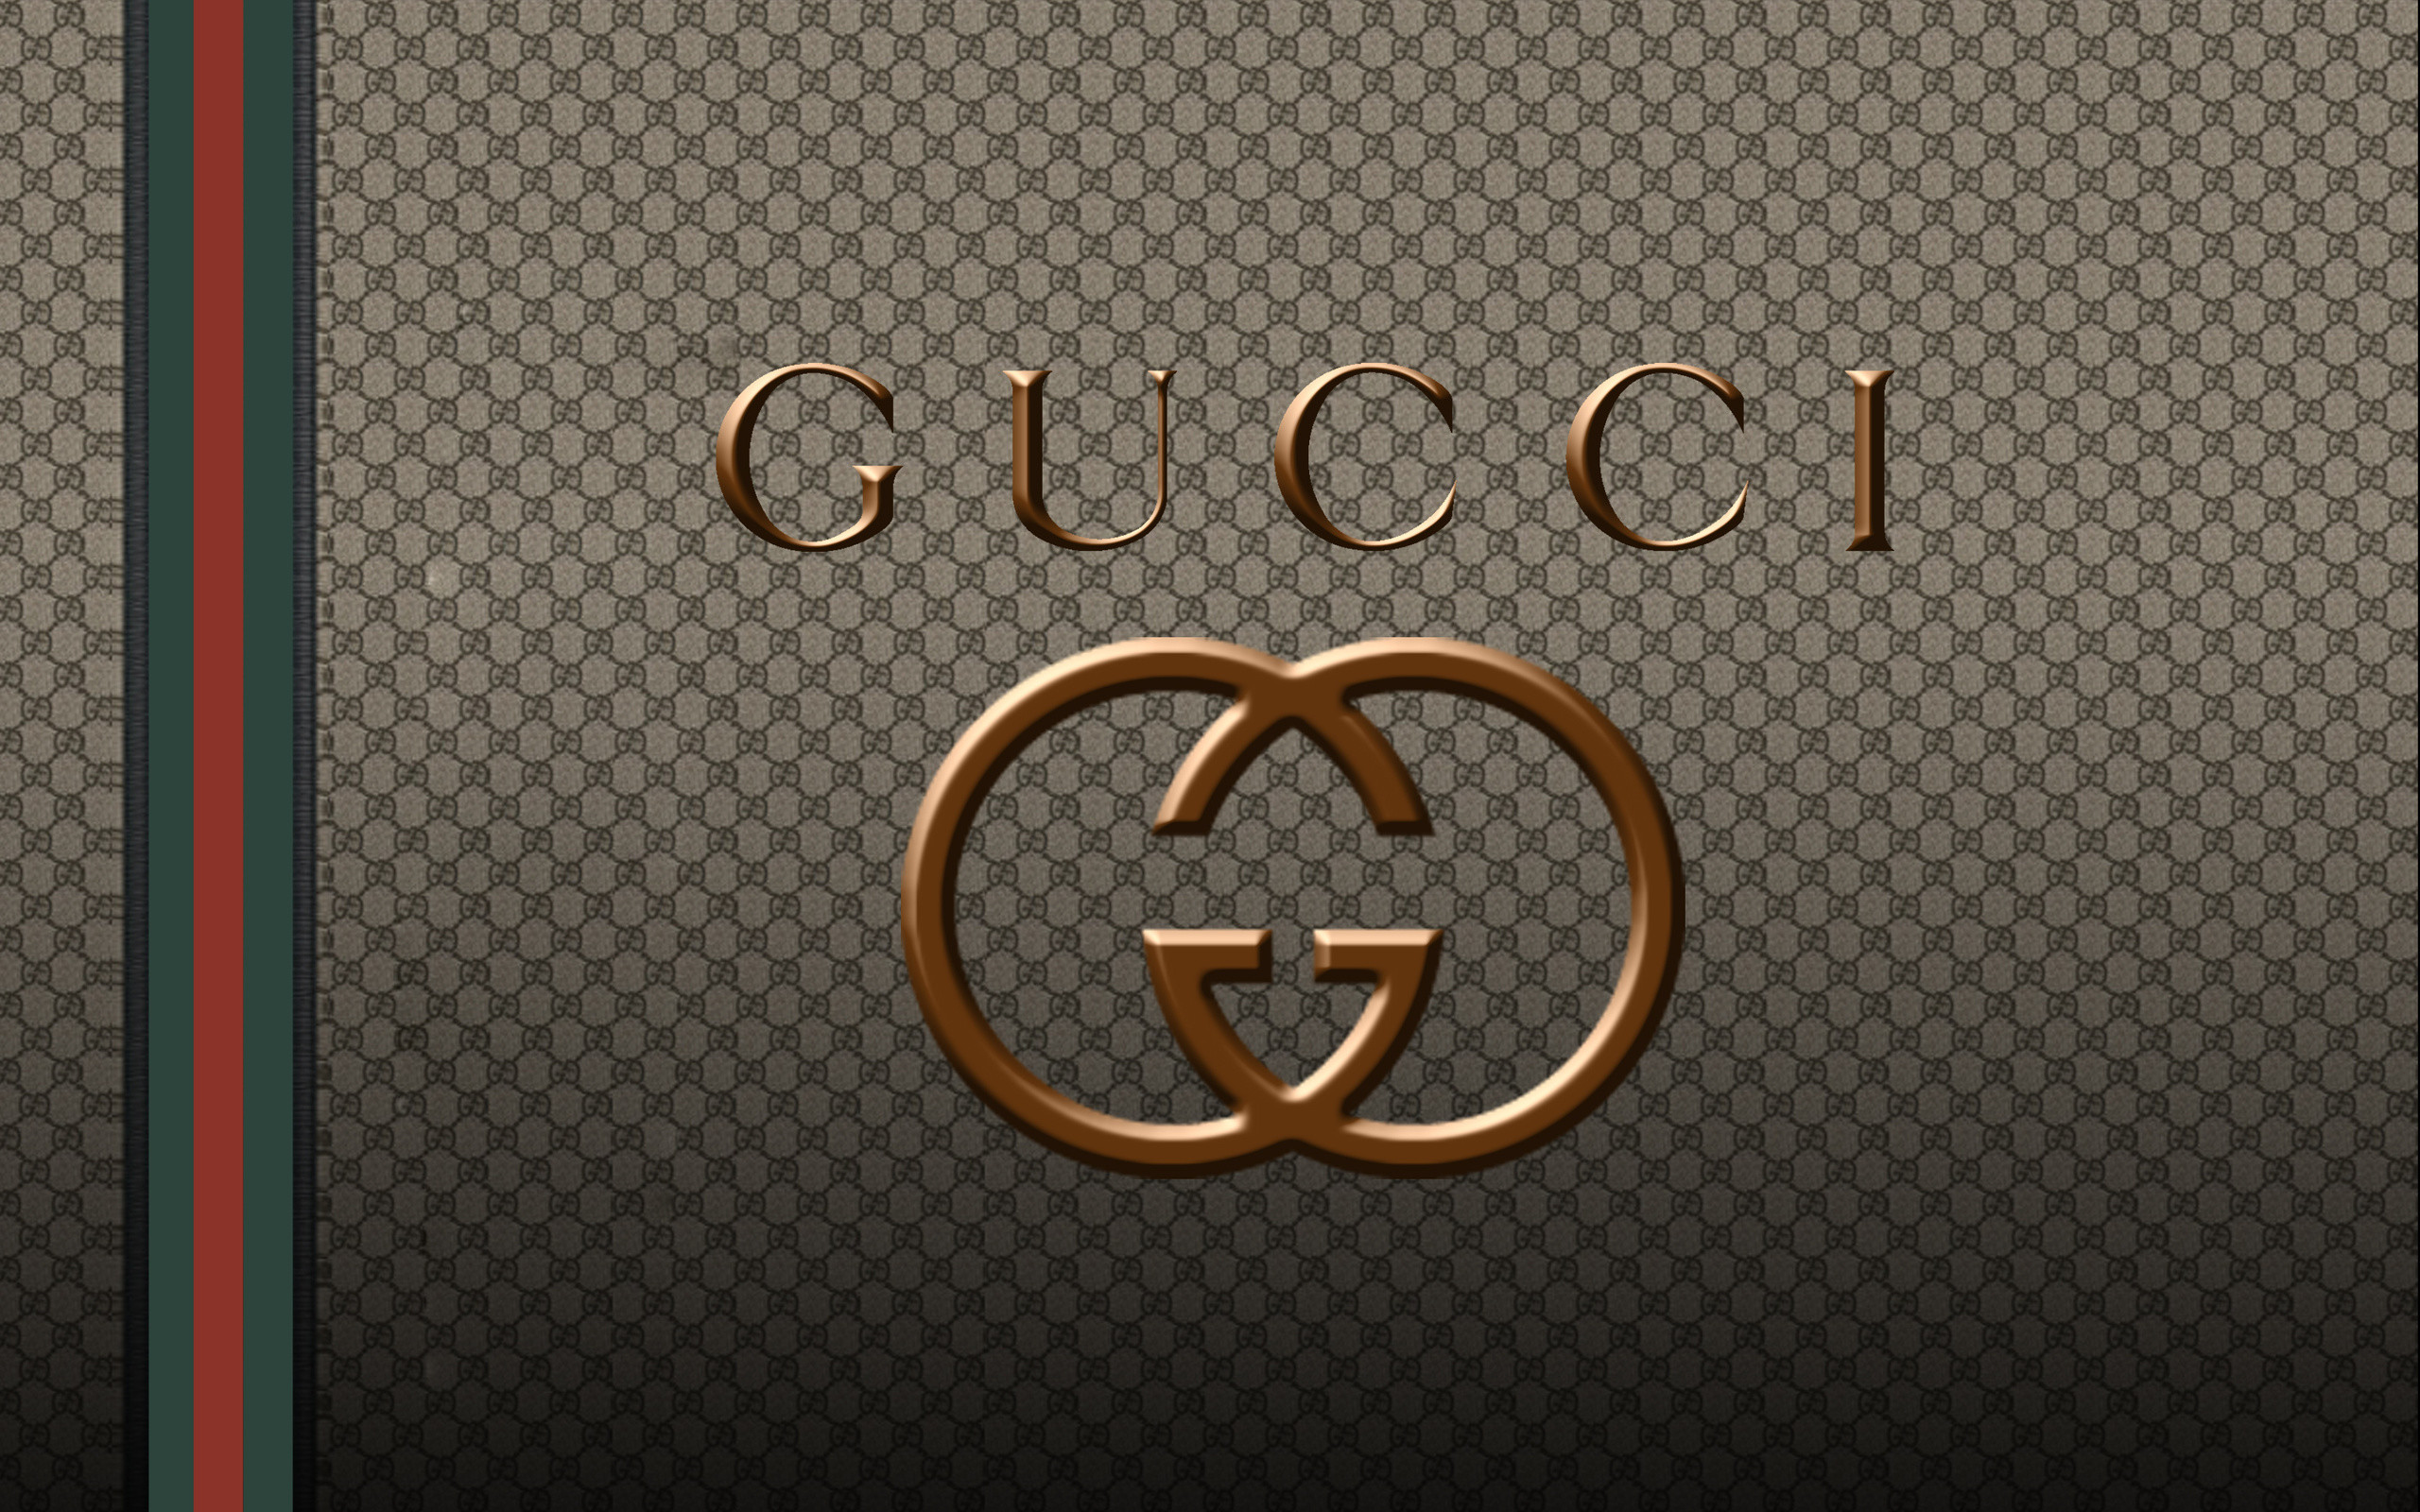 2560x1600 Gucci Named Top Brand in Study of Social Media Influencers. Gucci-HD- Wallpaper